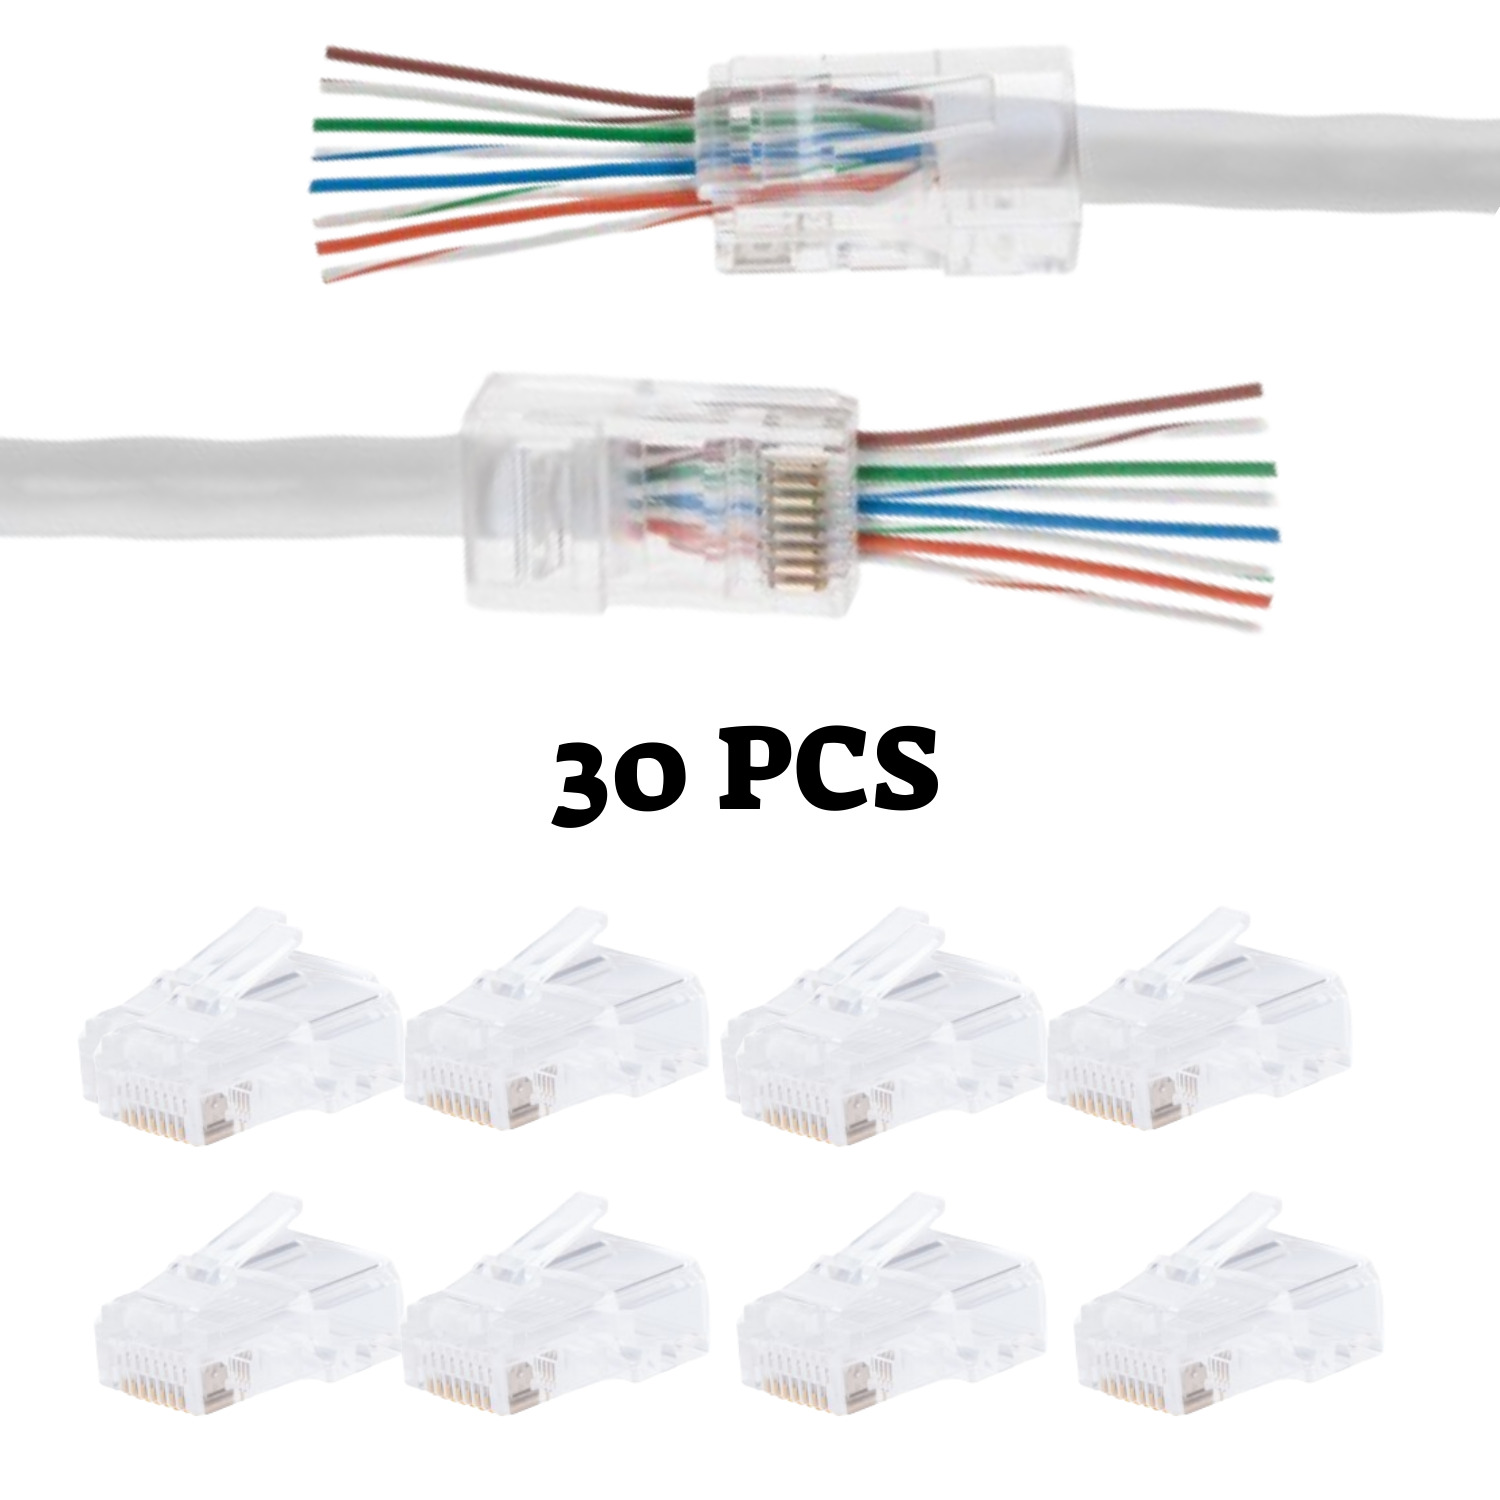 30 pcs RJ45 End Pass Through Connector for CAT5e UTP Network Cable Gold Plated